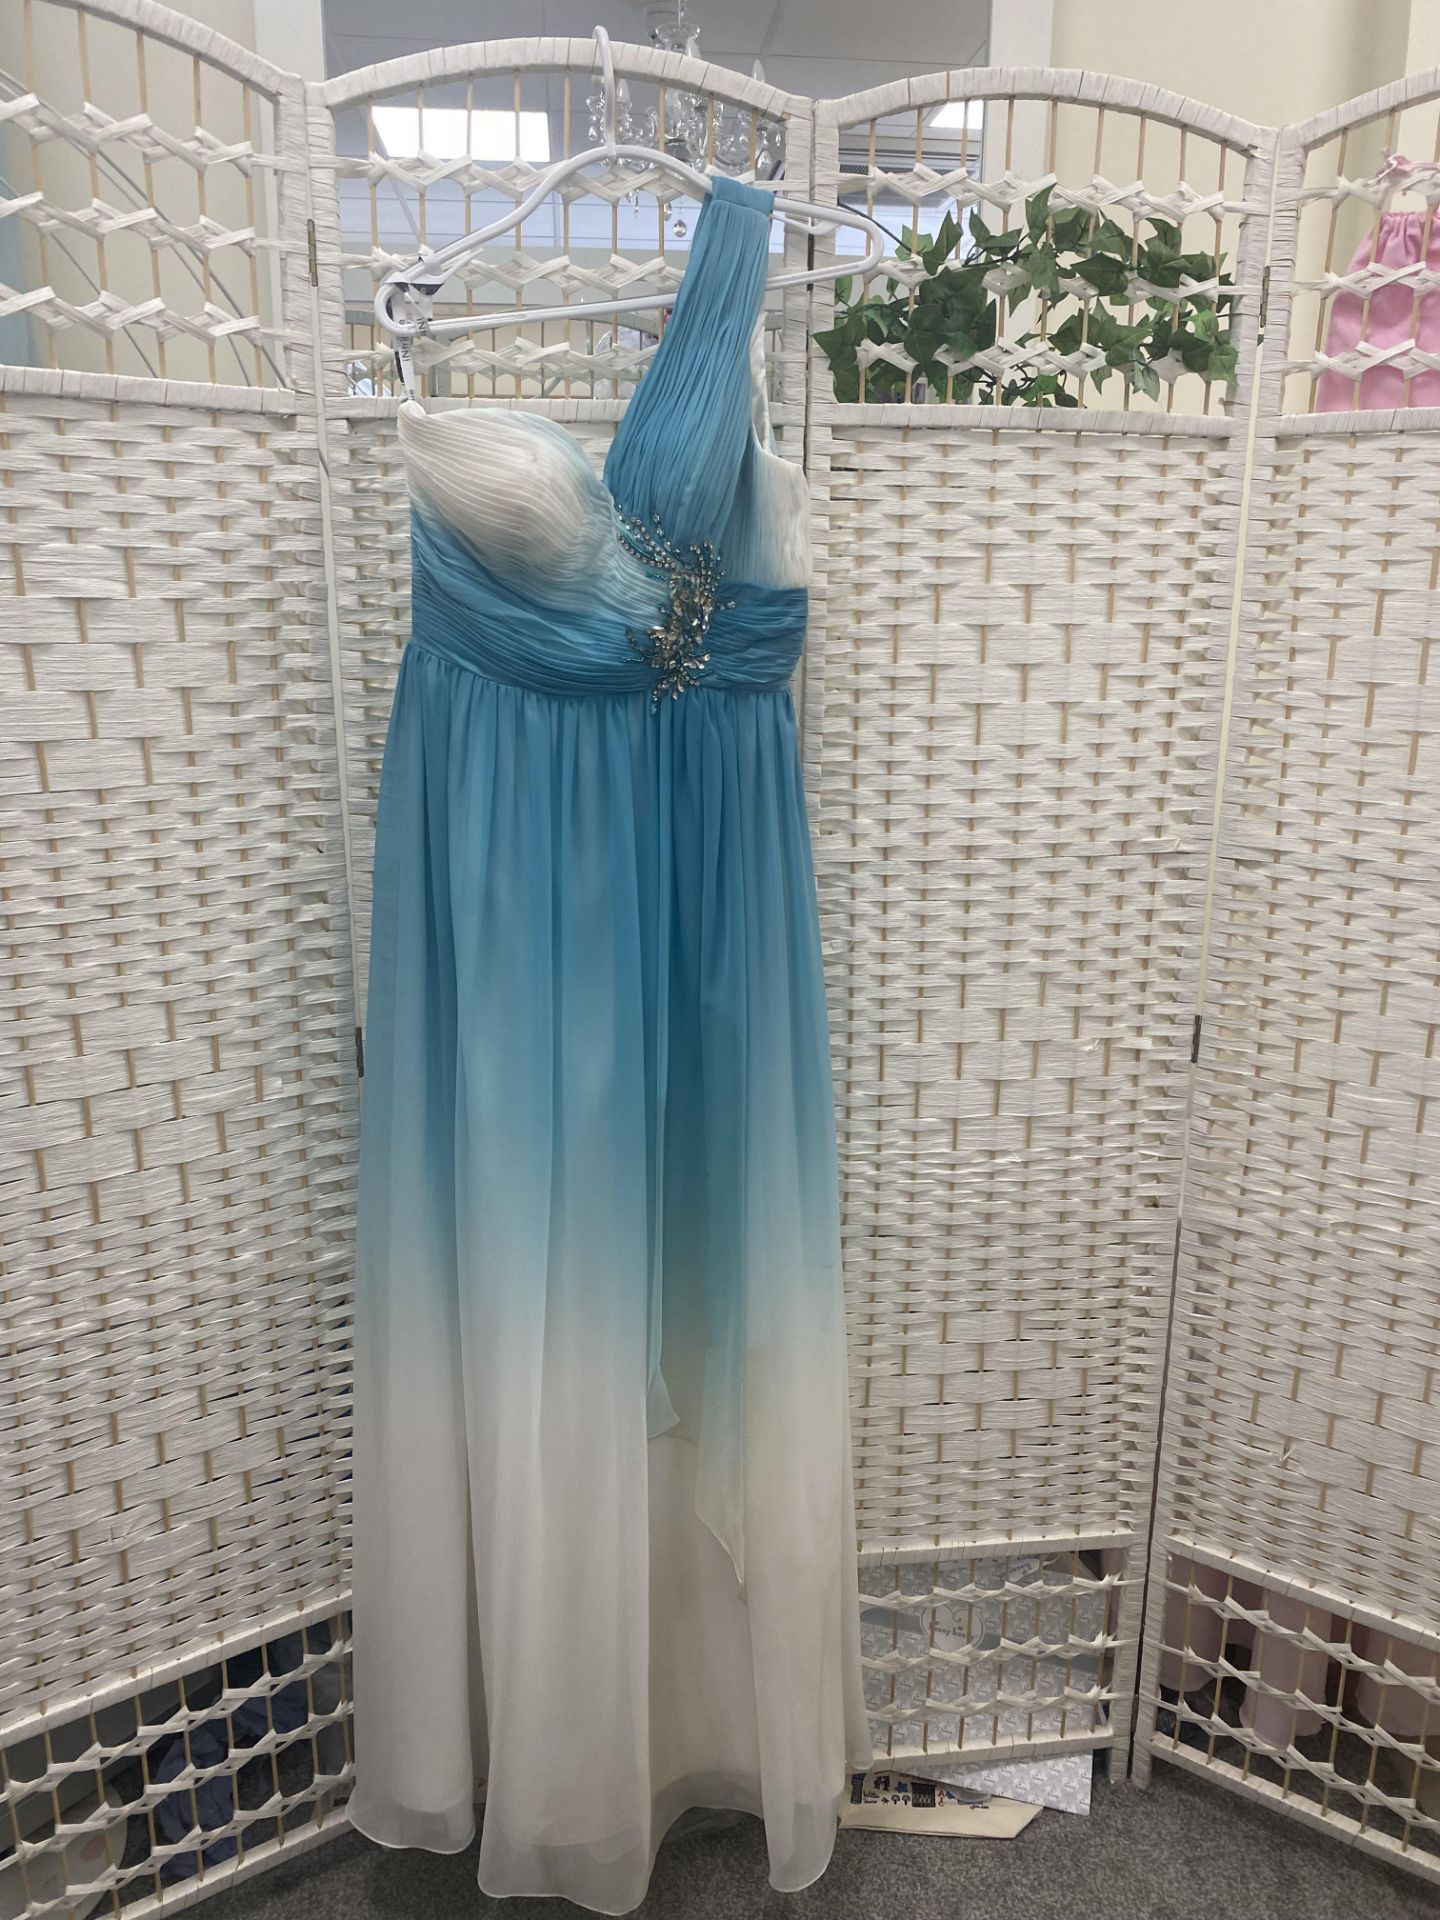 Alexia Designs Blue and White Ombre Prom Dress Size 6 - Image 2 of 7